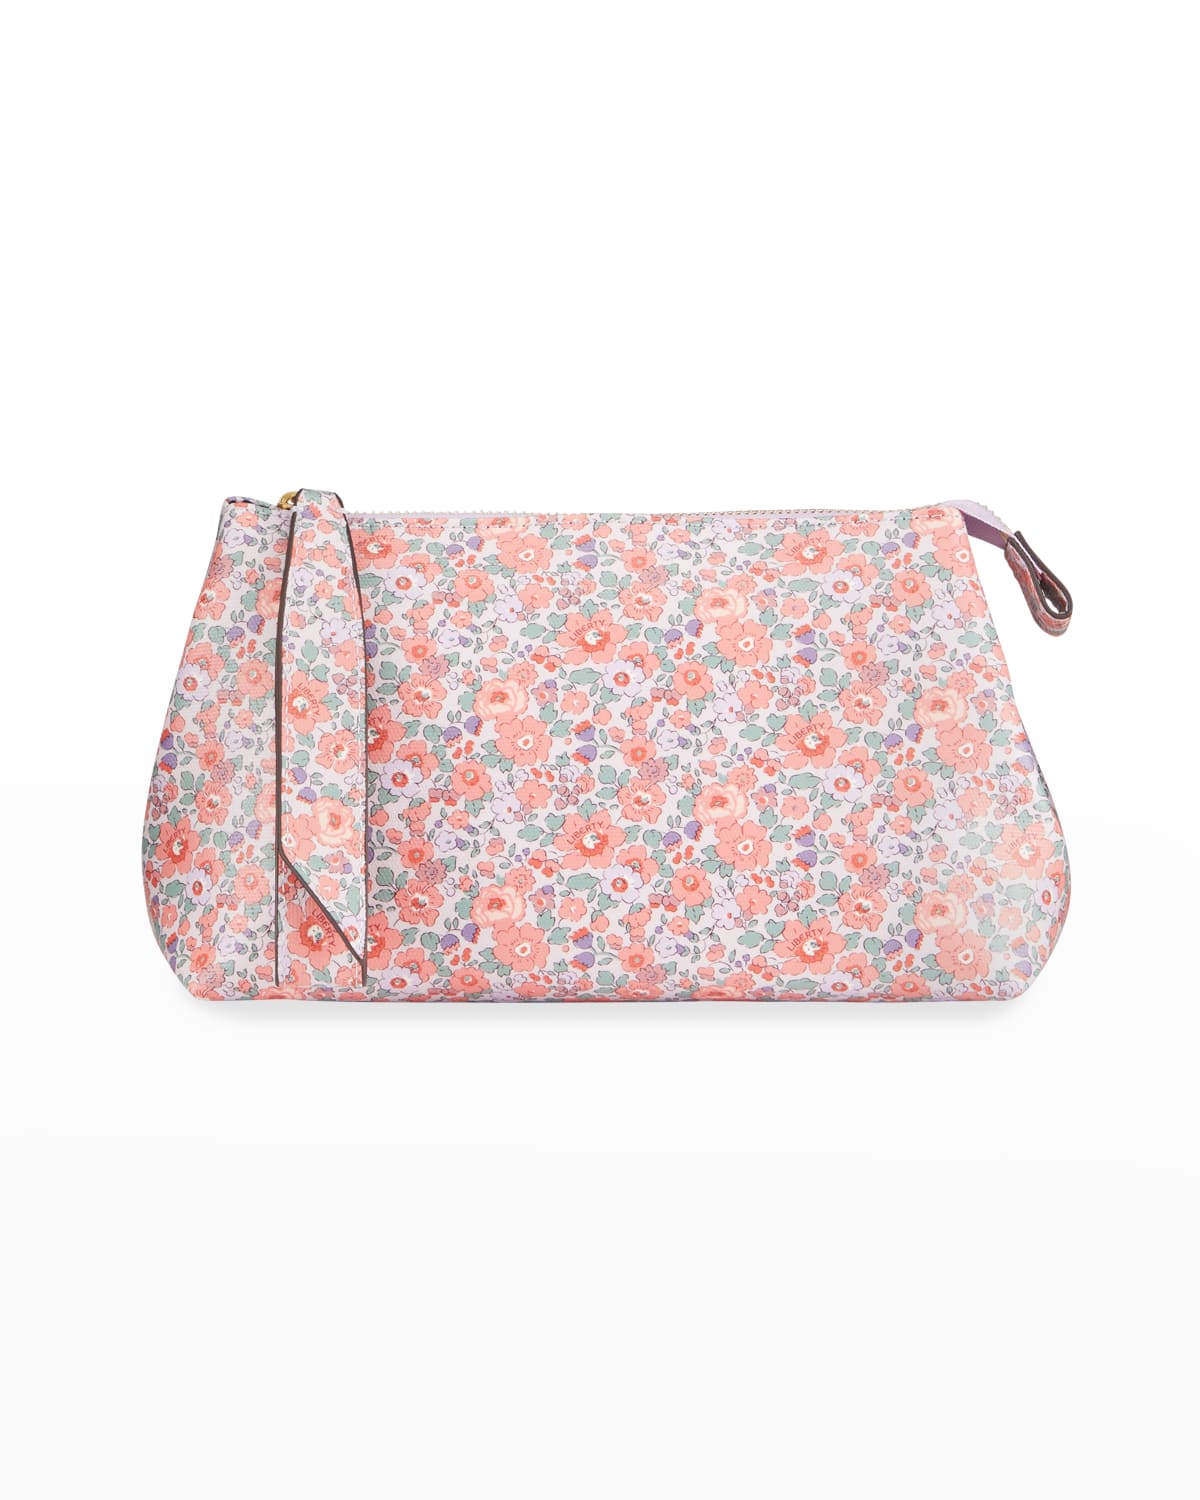 Liberty London Small Betsy Floral-Print Zip Clutch Bag